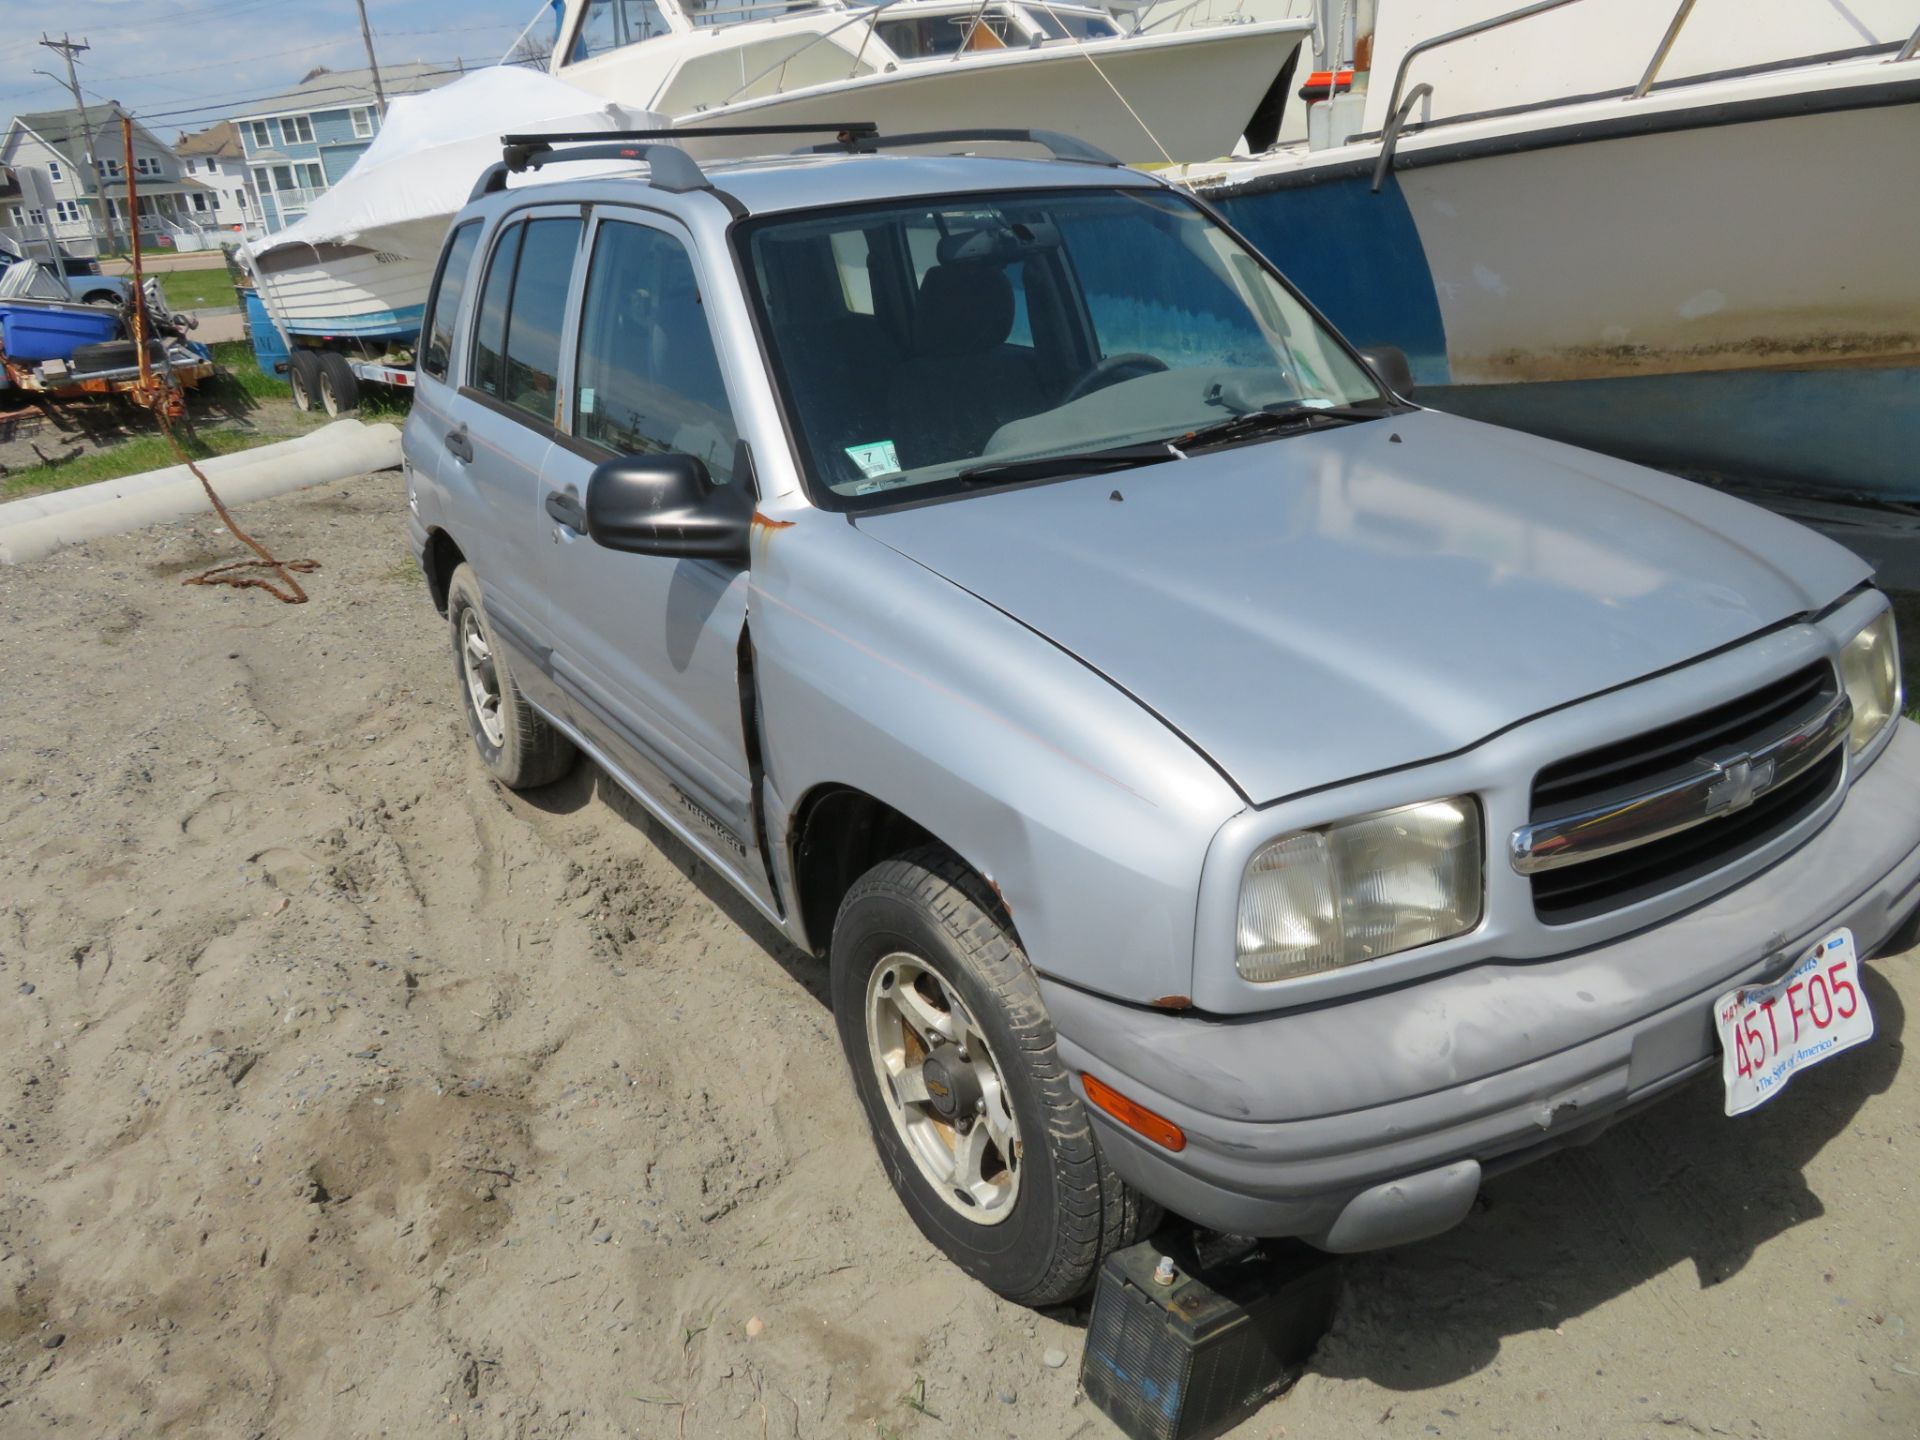 1999 Chevy Tracker 4WD, Odom: NA, V/N: 2CNBJ13C3X6905895 (NO TITLE - FOR PARTS ONLY)